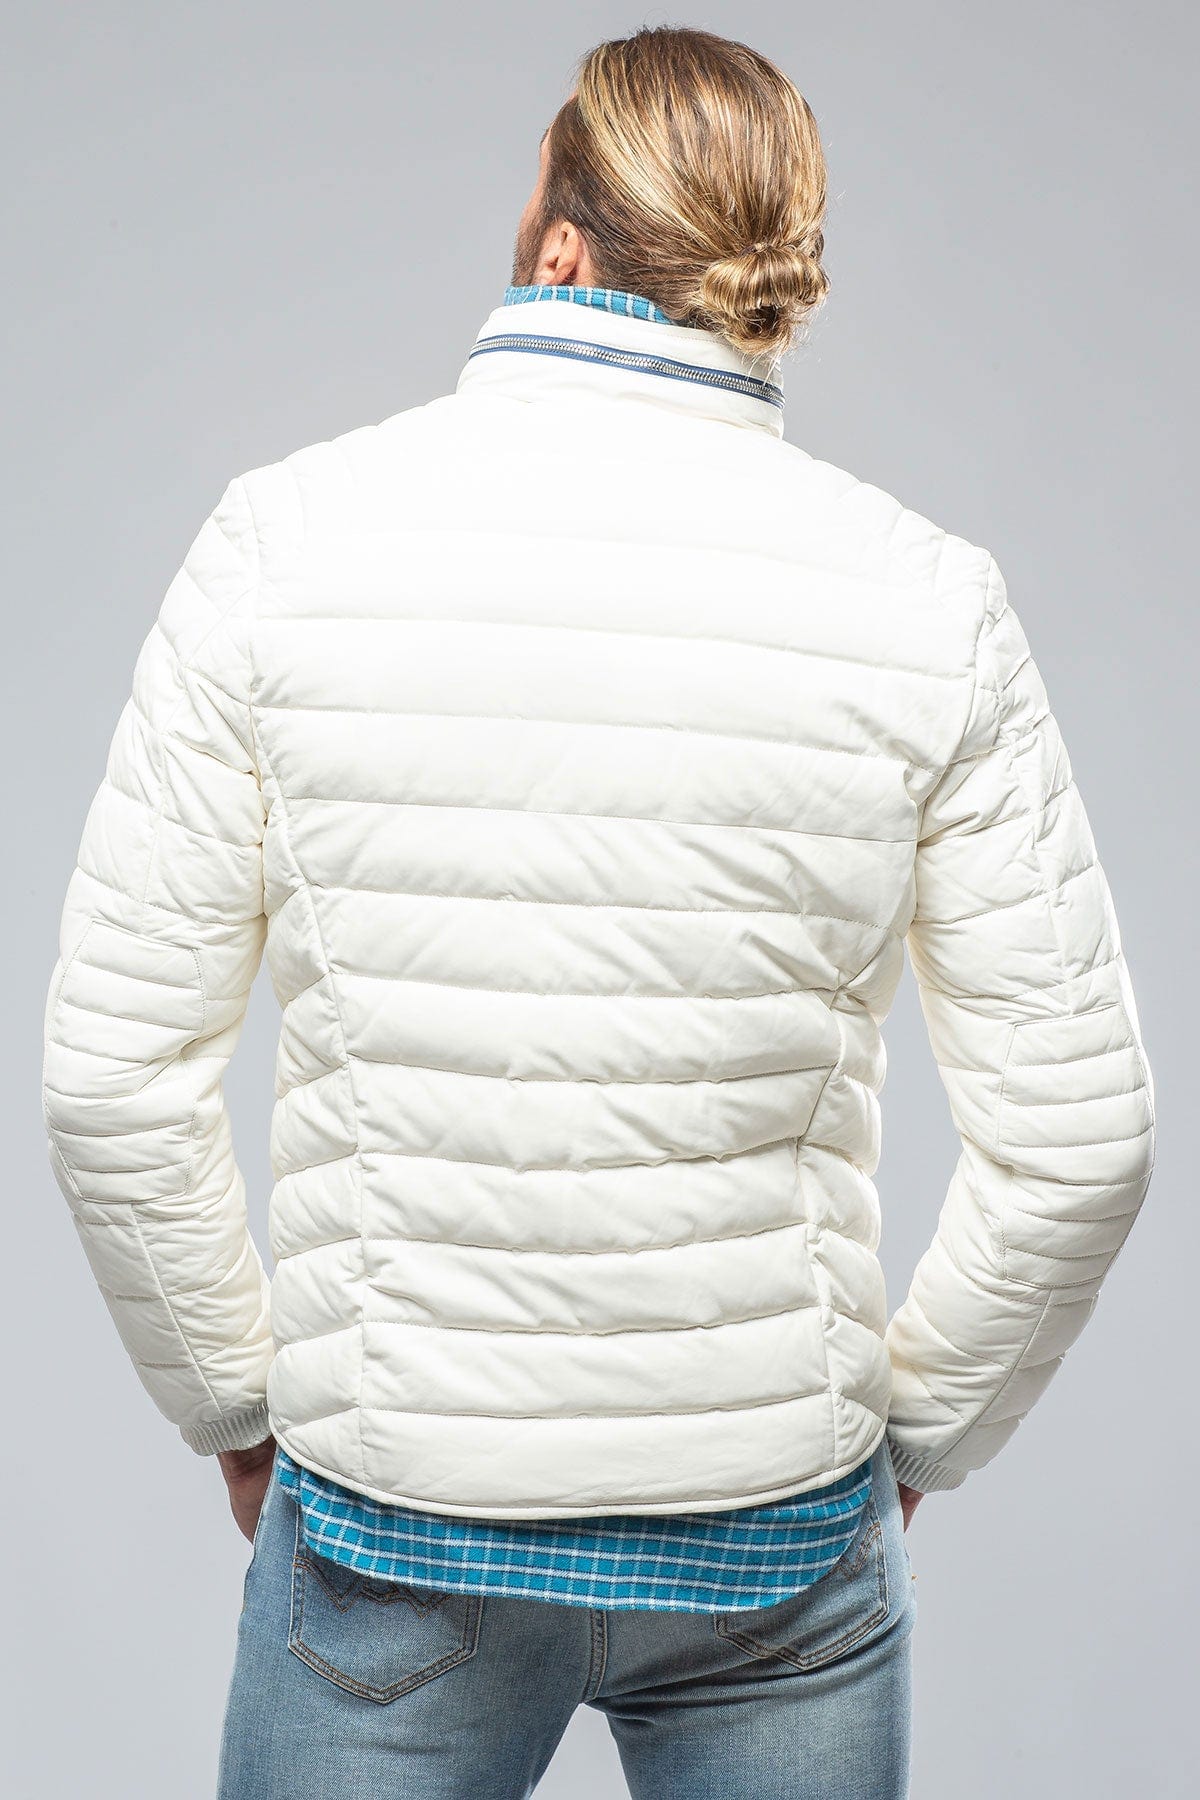 F1 Racer Jacket in White - AXEL'S